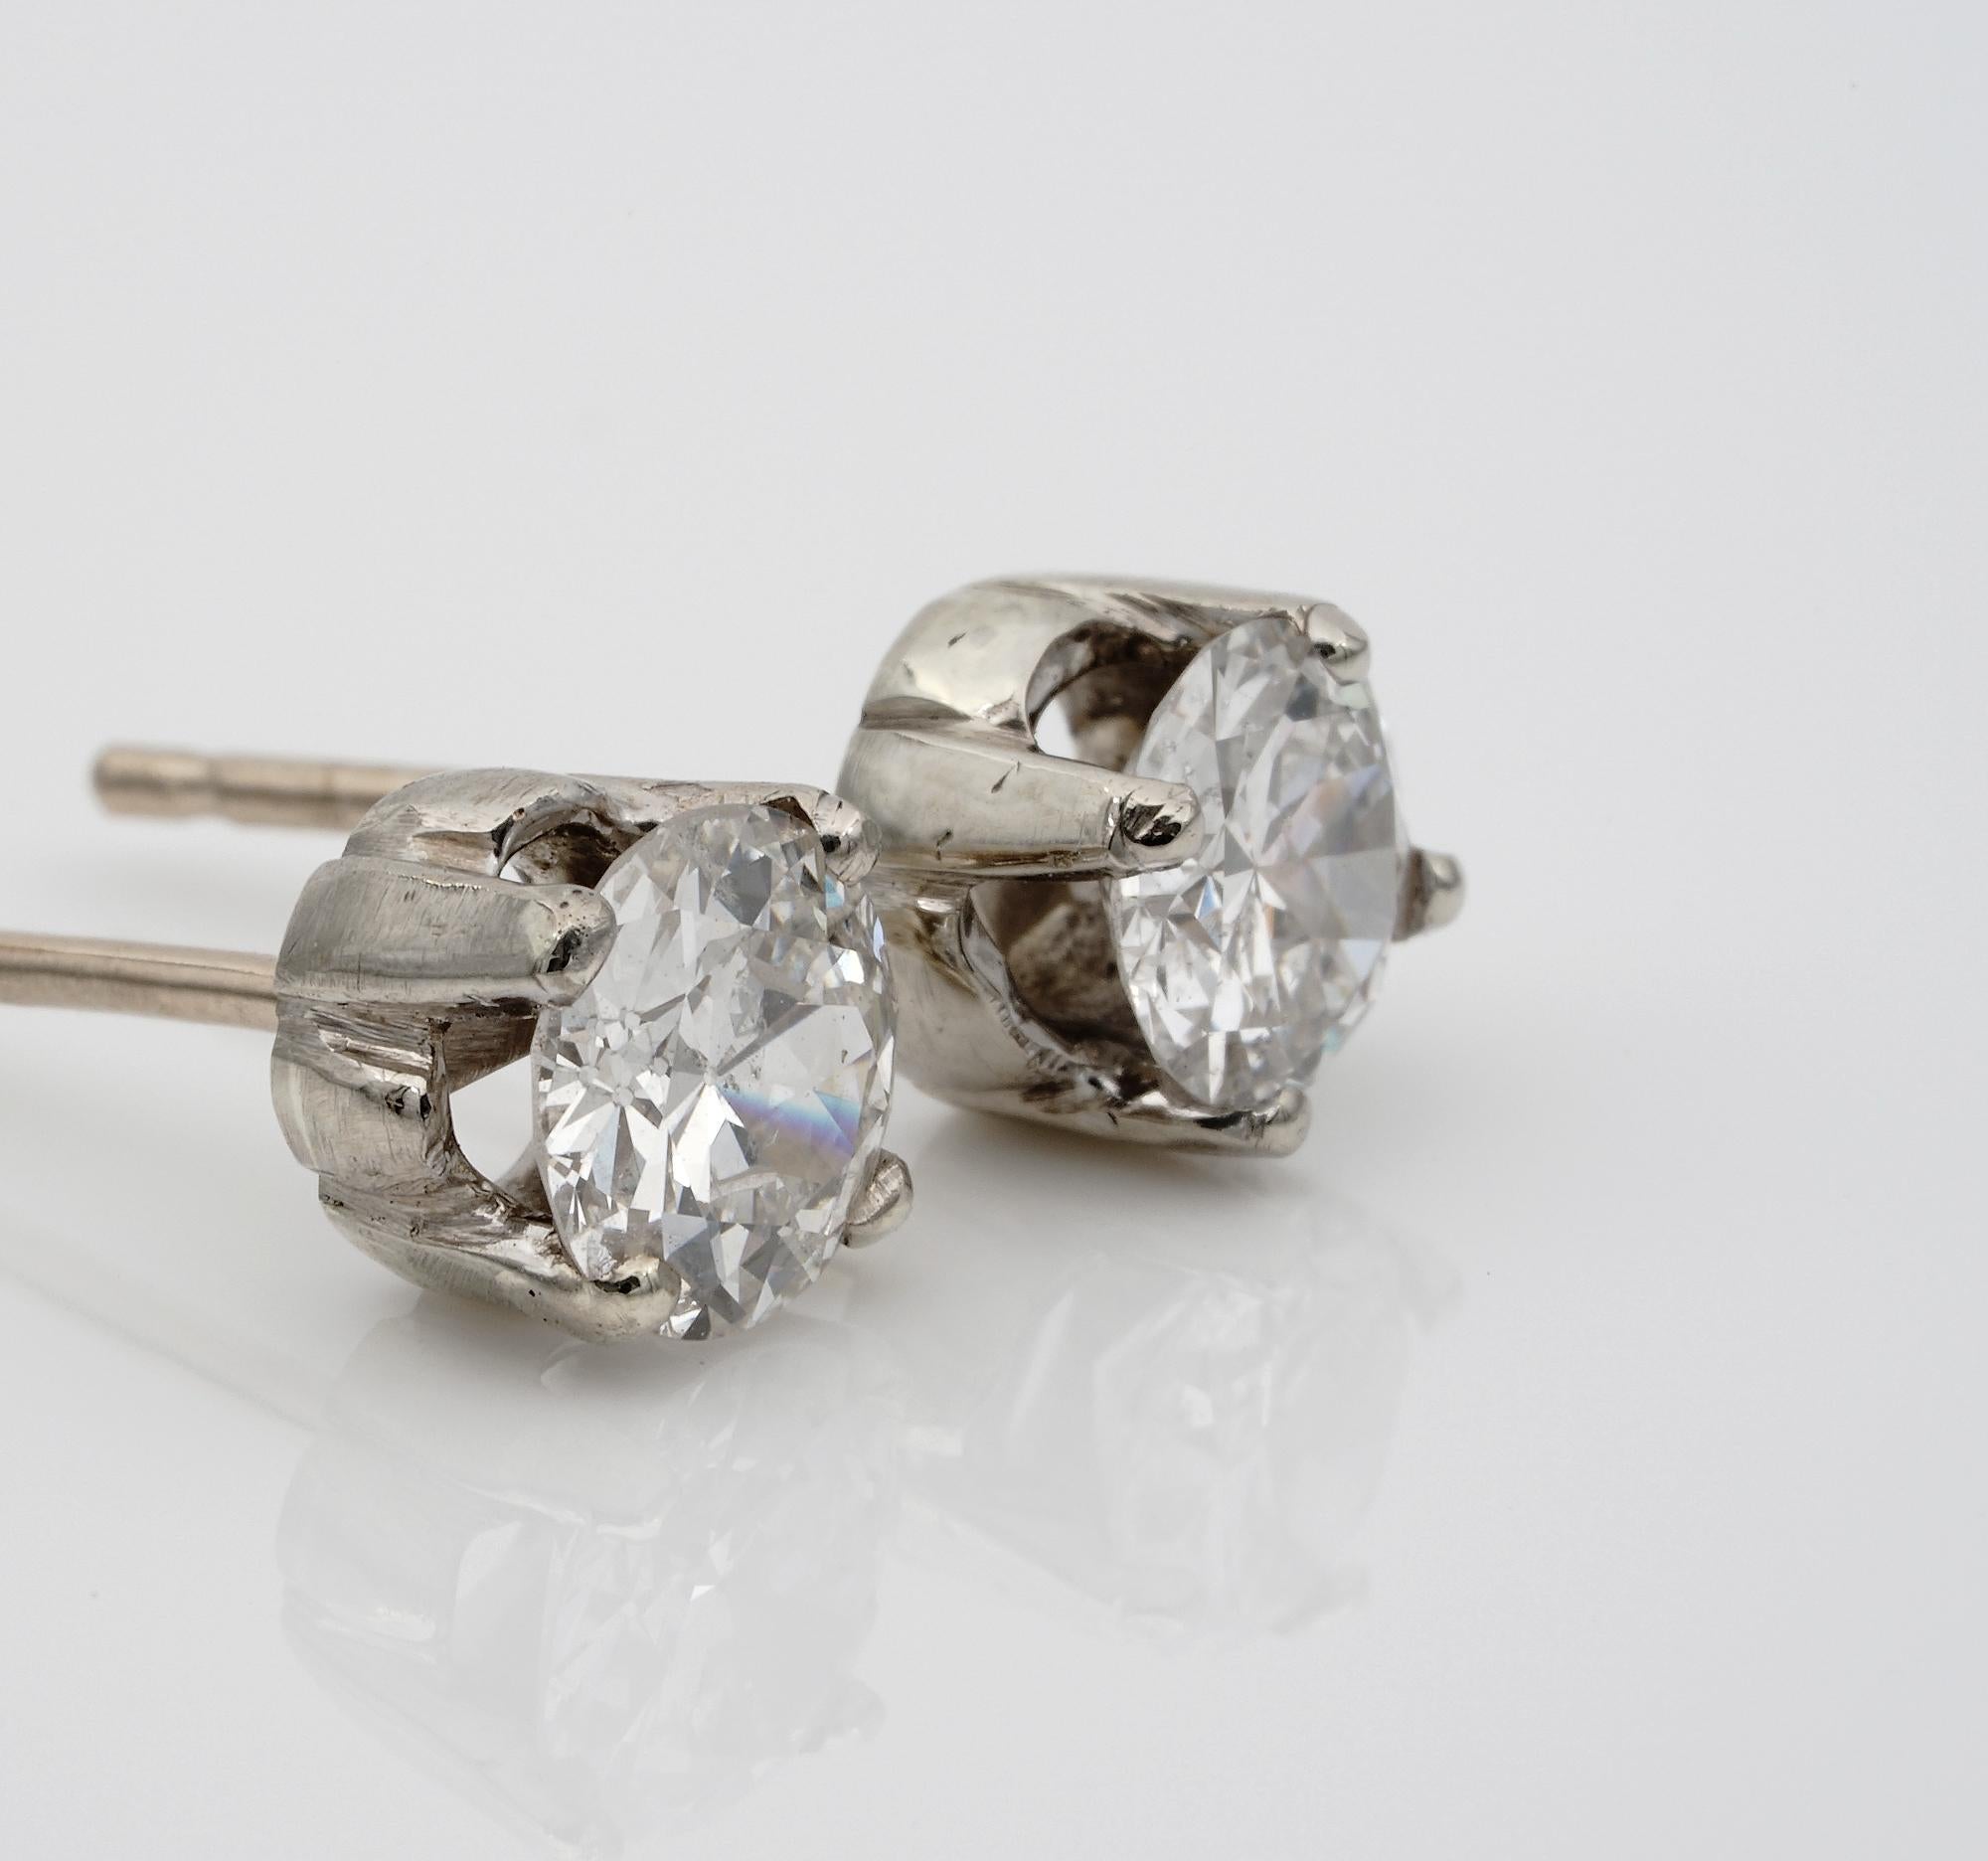 Best Companion

Gorgeous Diamond Solitaire stud earrings form the late Art Deco Period 1935 ca
Perfect pair to wear all the time day/evening 
Classy vintage, antique hand crafted, four prong 18 KT solid gold mount – tested and guaranteed- being